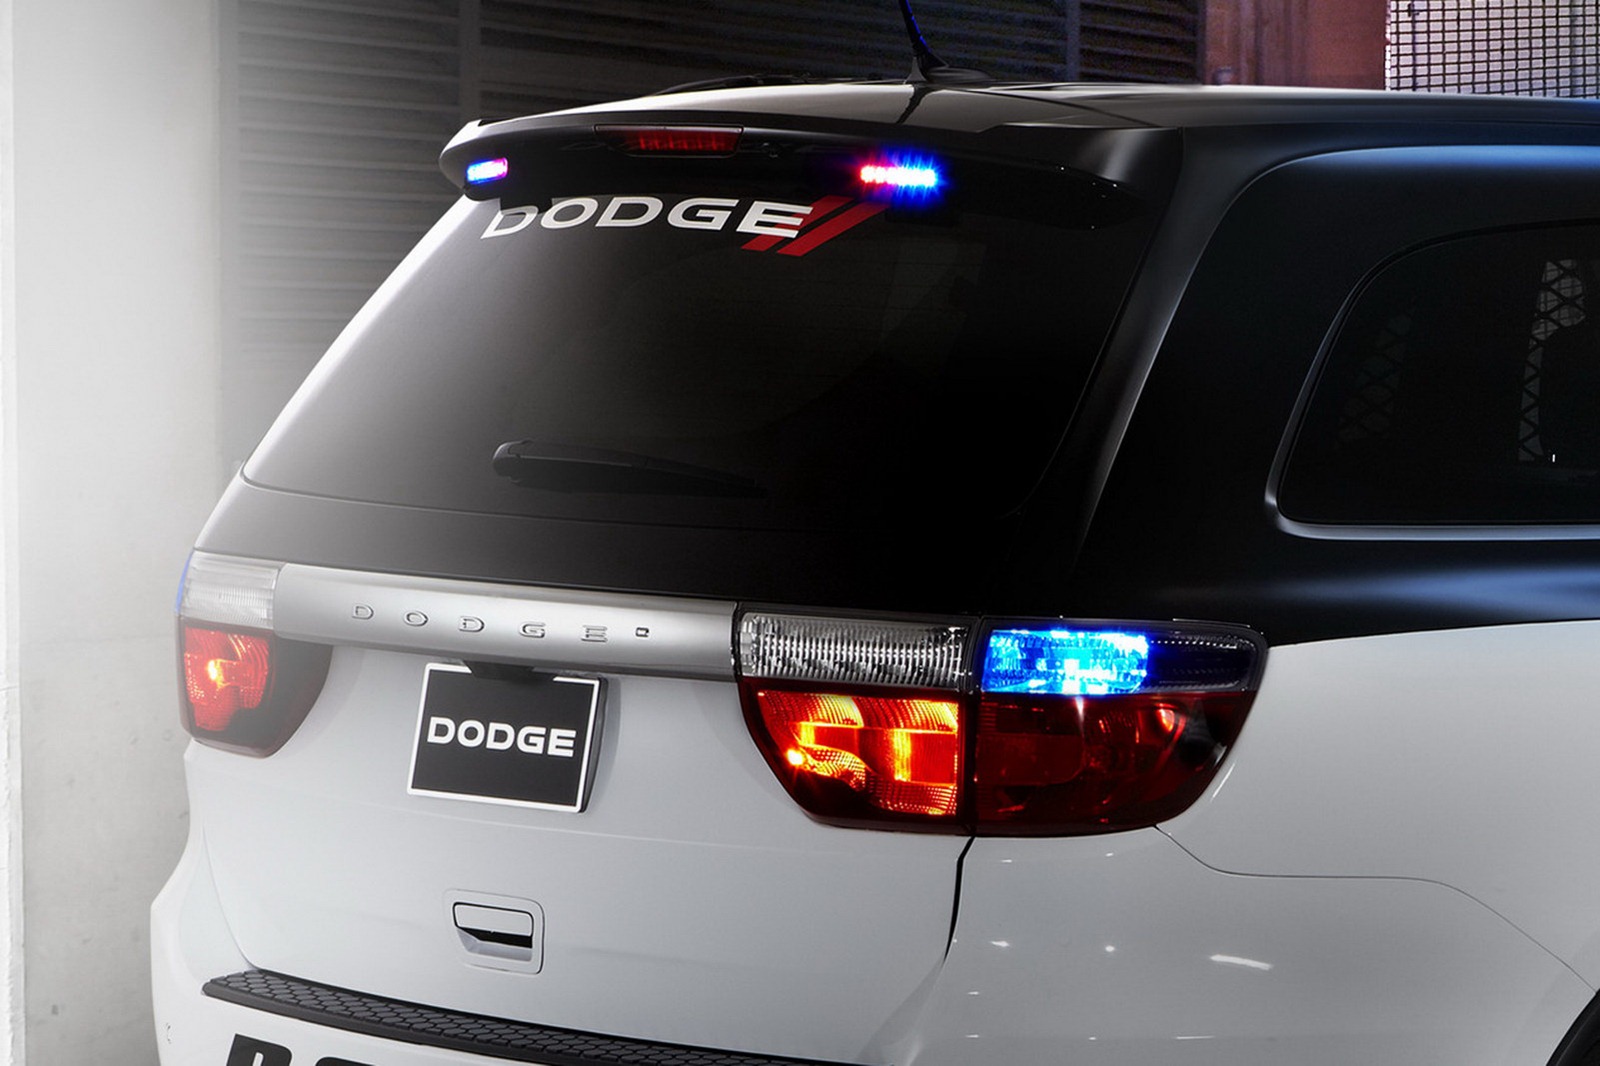 Dodge Durango Police and Fire & Rescue 2012 photo 77494 pictures ...